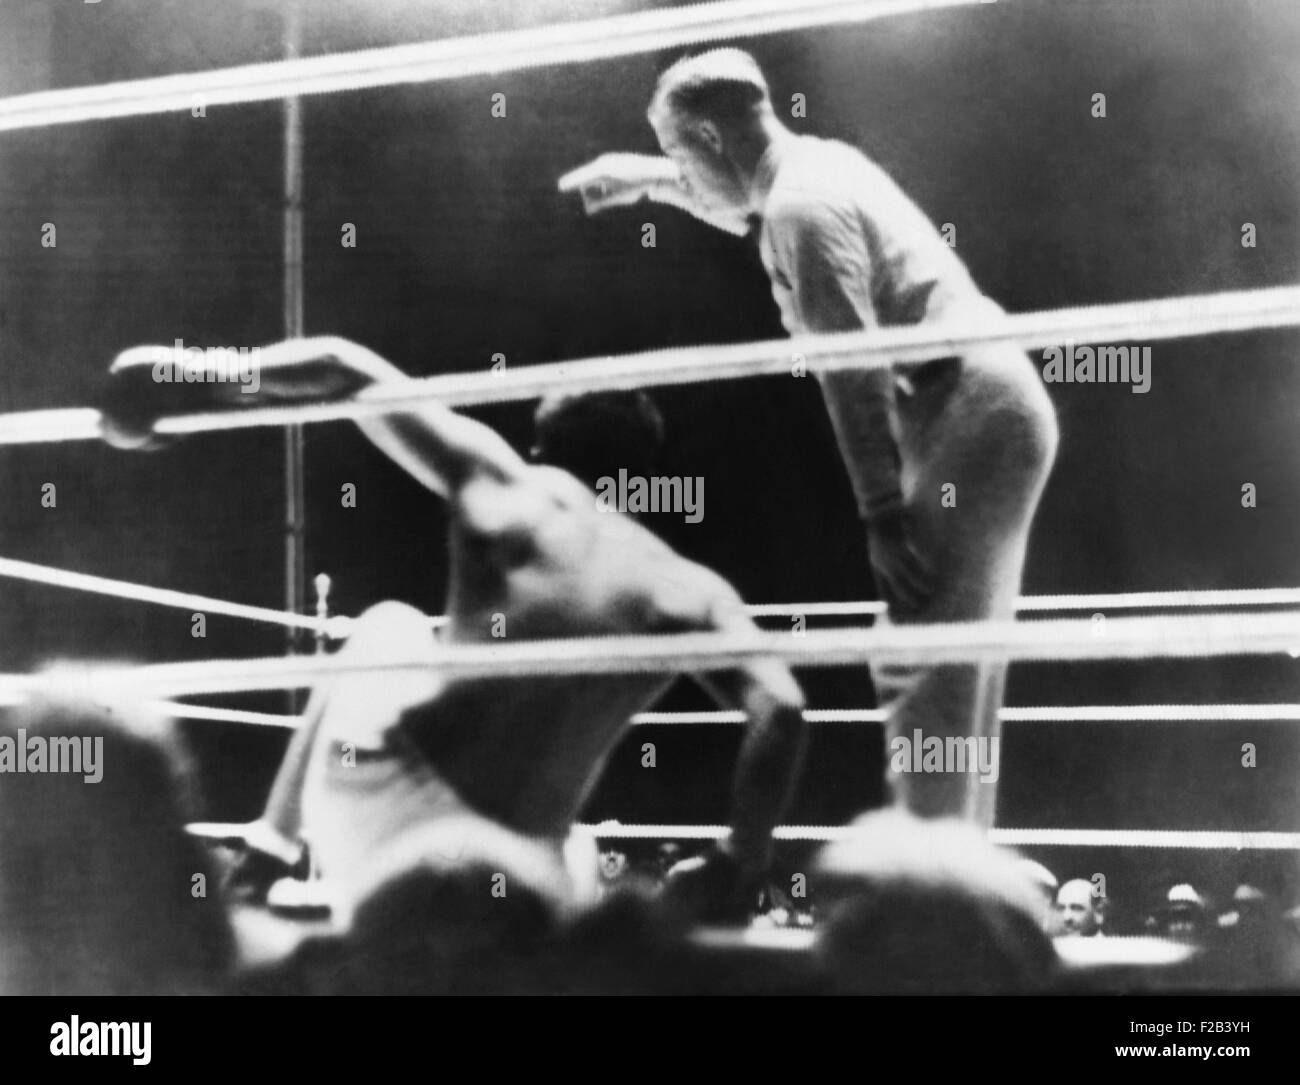 'Long Count Fight', the Gene Tunney-Jack Dempsey boxing match of Sept. 22, 1927. Tunney downed by Dempsey in the 7th round. Referee Dave Barry waiting several seconds to begin the count until Dempsey retreated to a neutral corner. - (CSU 2015 5 145) Stock Photo